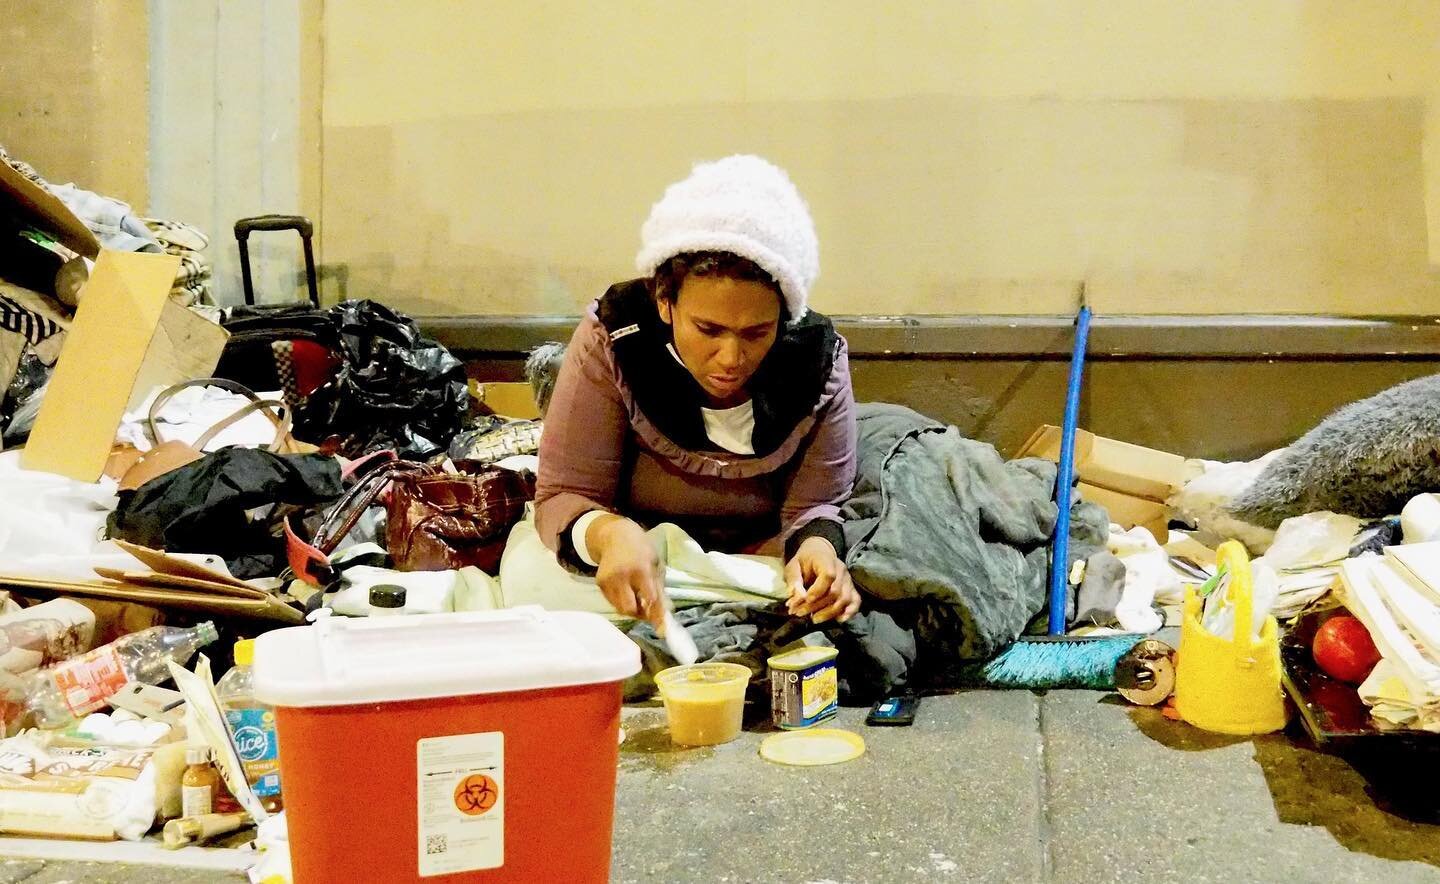 Help support my mission to feed 1000 of my unhoused neighbors in SF every month by signing up for recurring donations at http://FeedThePeopleSF.org. #FeedThePeople #SF #FeedThePeopleSF #MutualAid #FeedTheUnhoused #EatTheRich #SolidarityForever #Housi